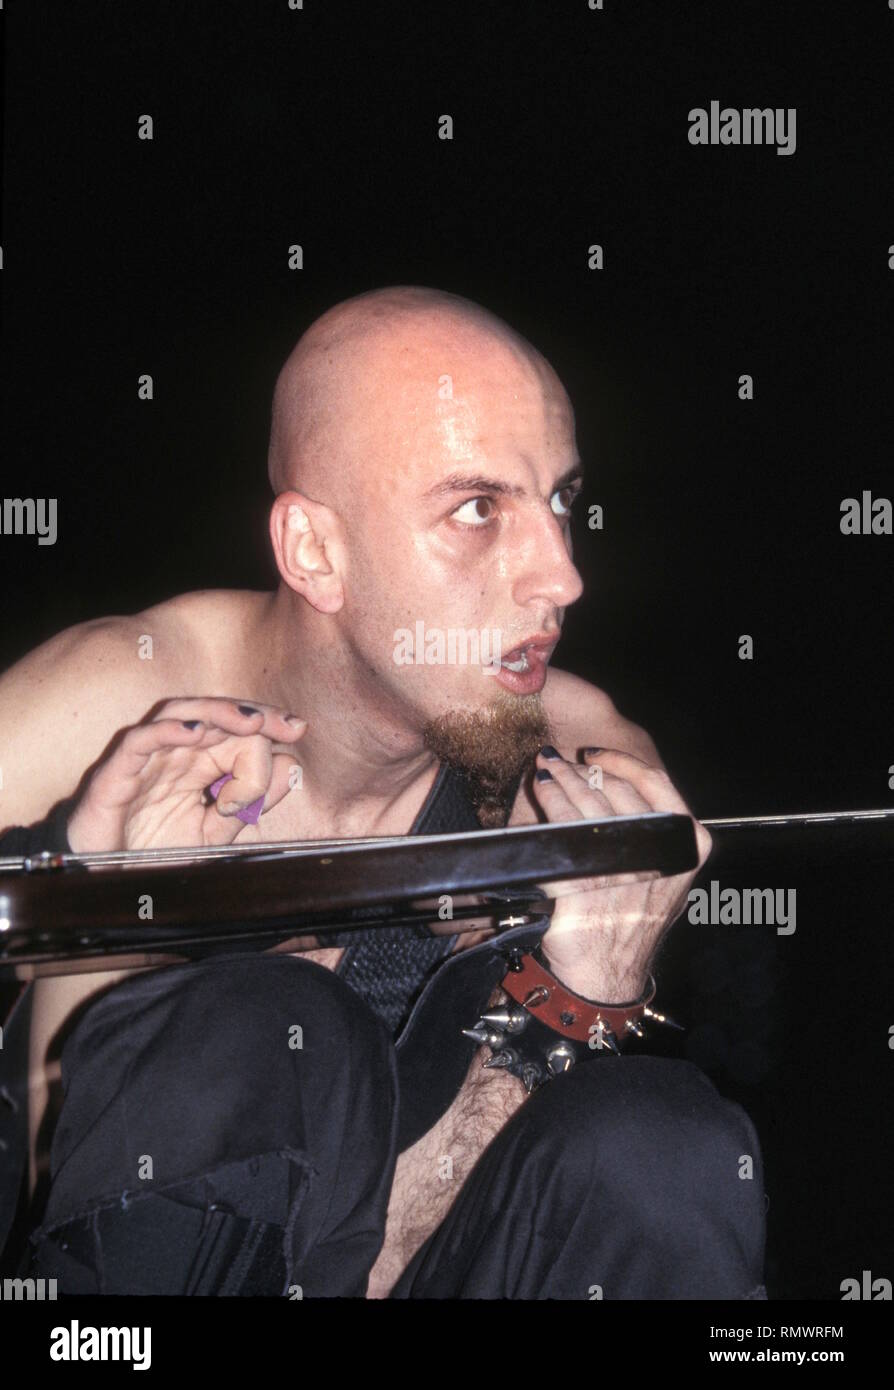 Bassist Shavarsh "Shavo" Odadjian of the hard rock band System of a Down is shown performing on stage during "live" concert appearance. Stock Photo